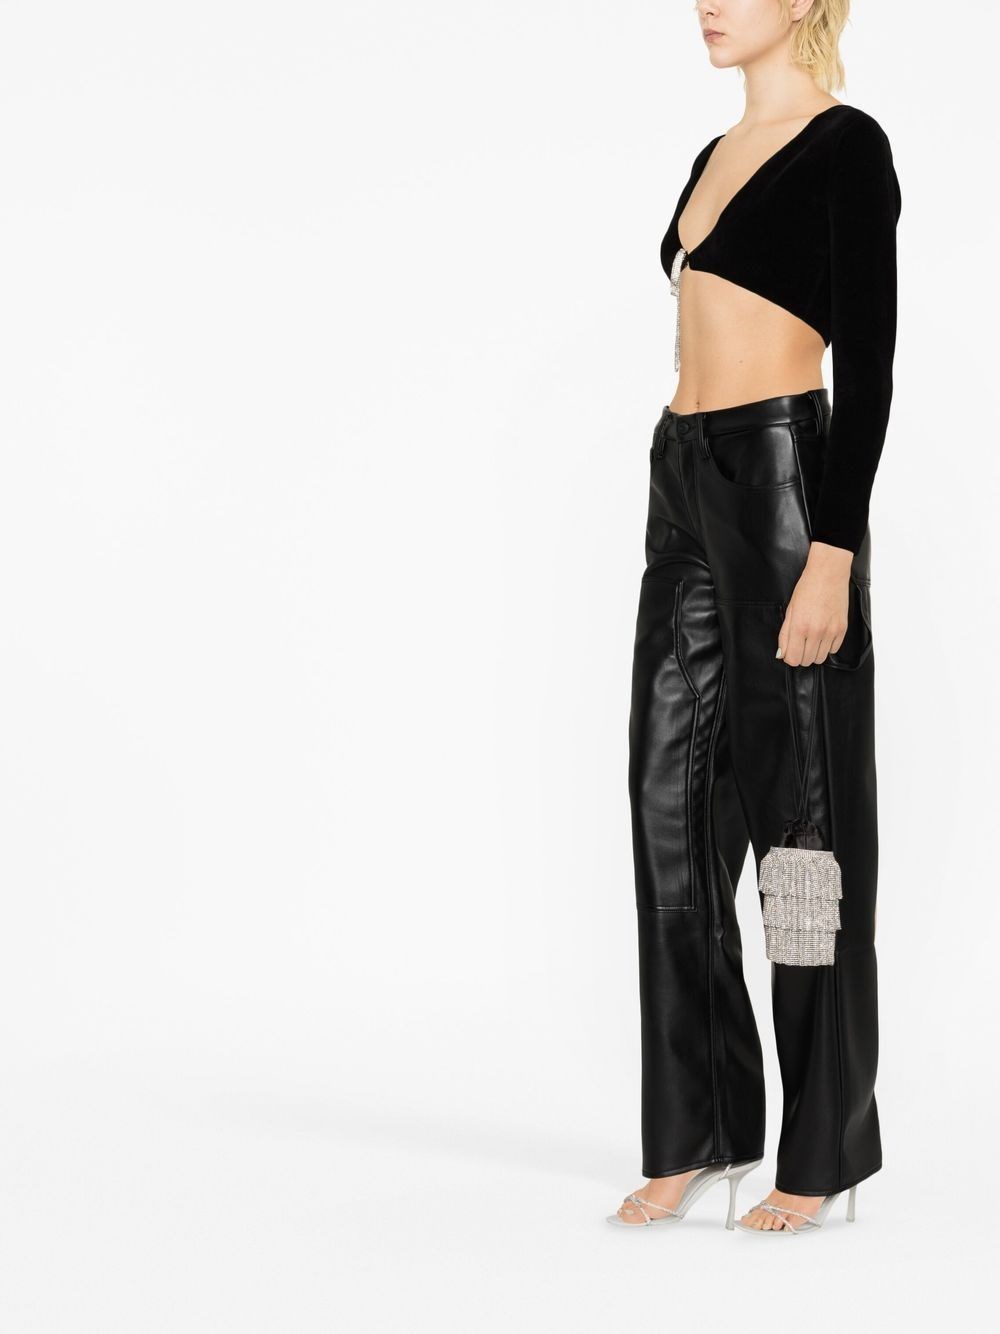 alexander wang CARDIGAN available on montiboutique.com - 51841